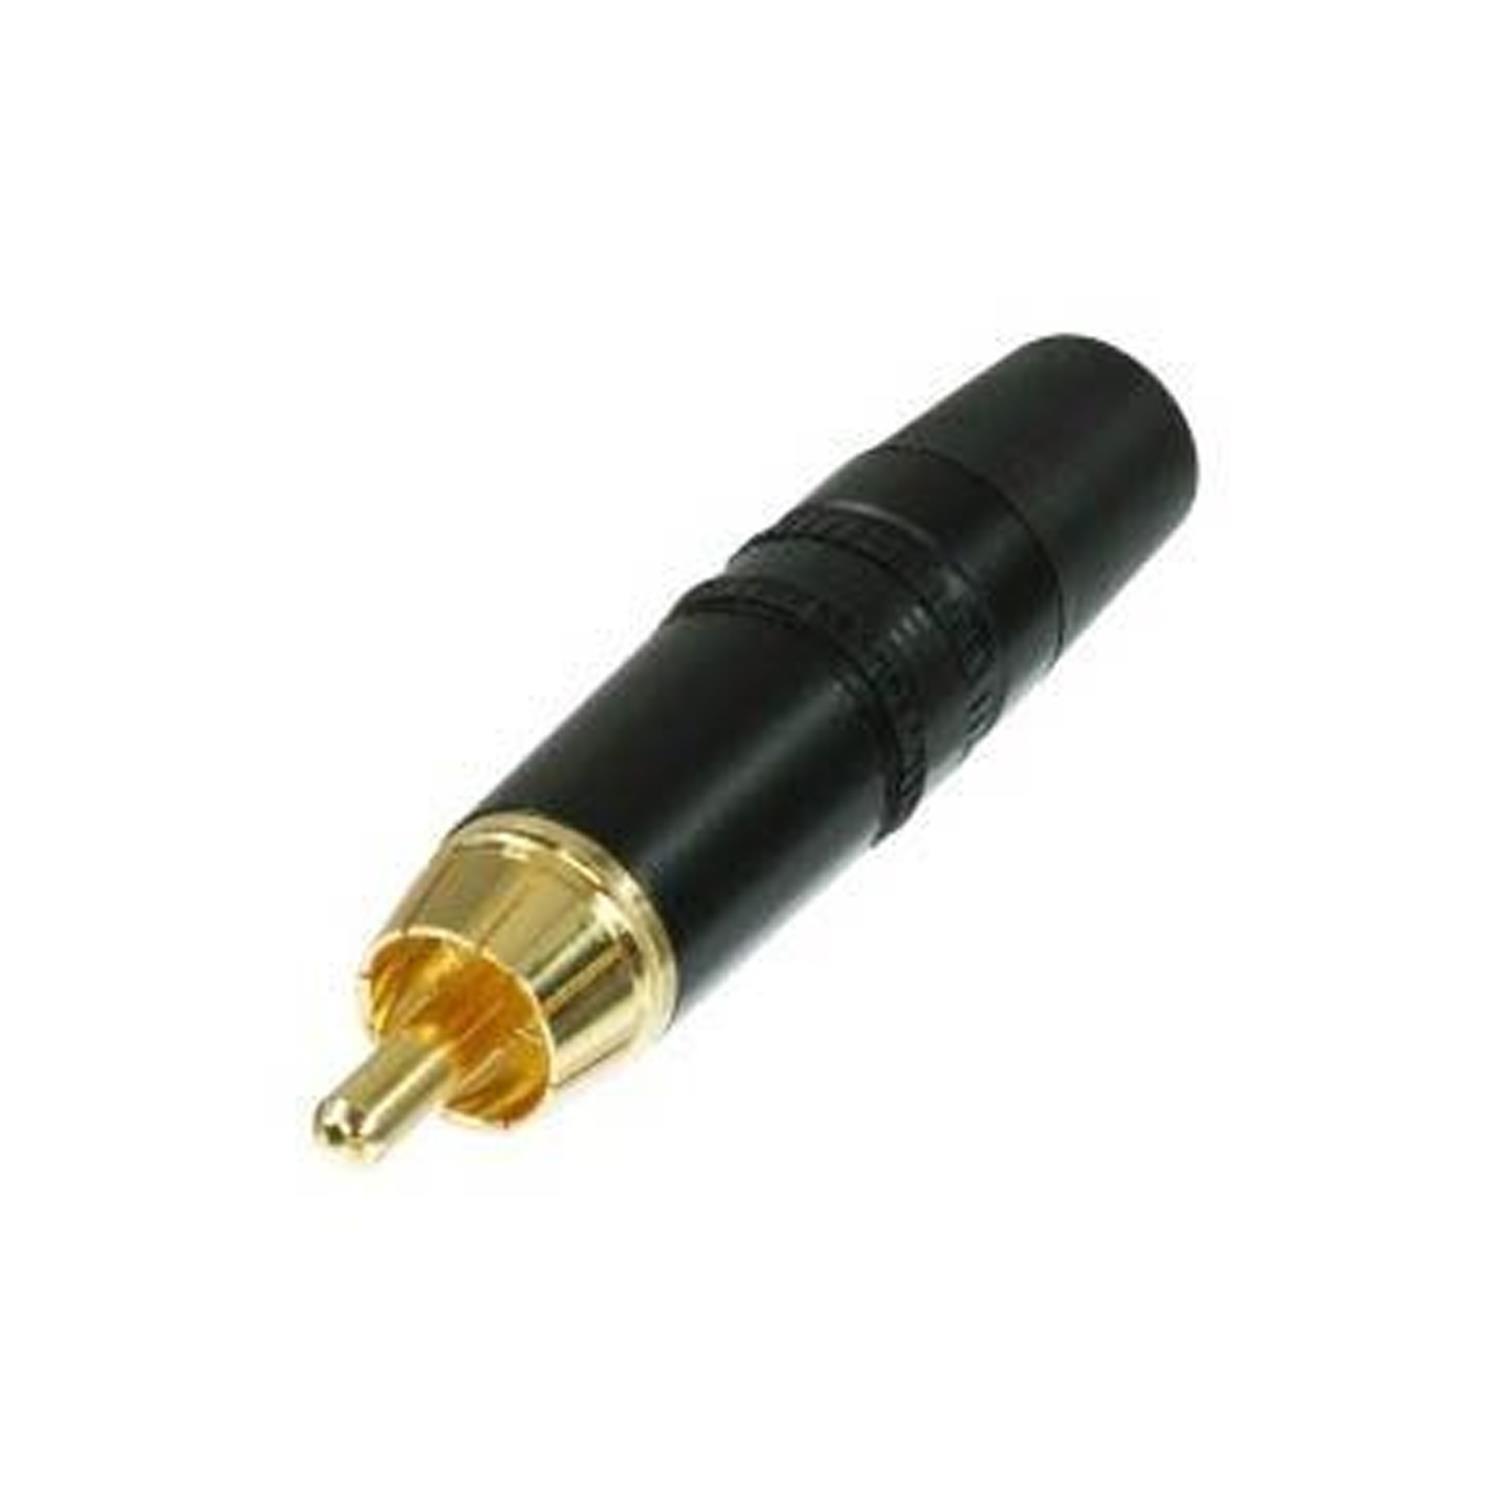 REAN NYS373-0 Phono RCA Plug Gold Plated Black Shell Ring - DY Pro Audio